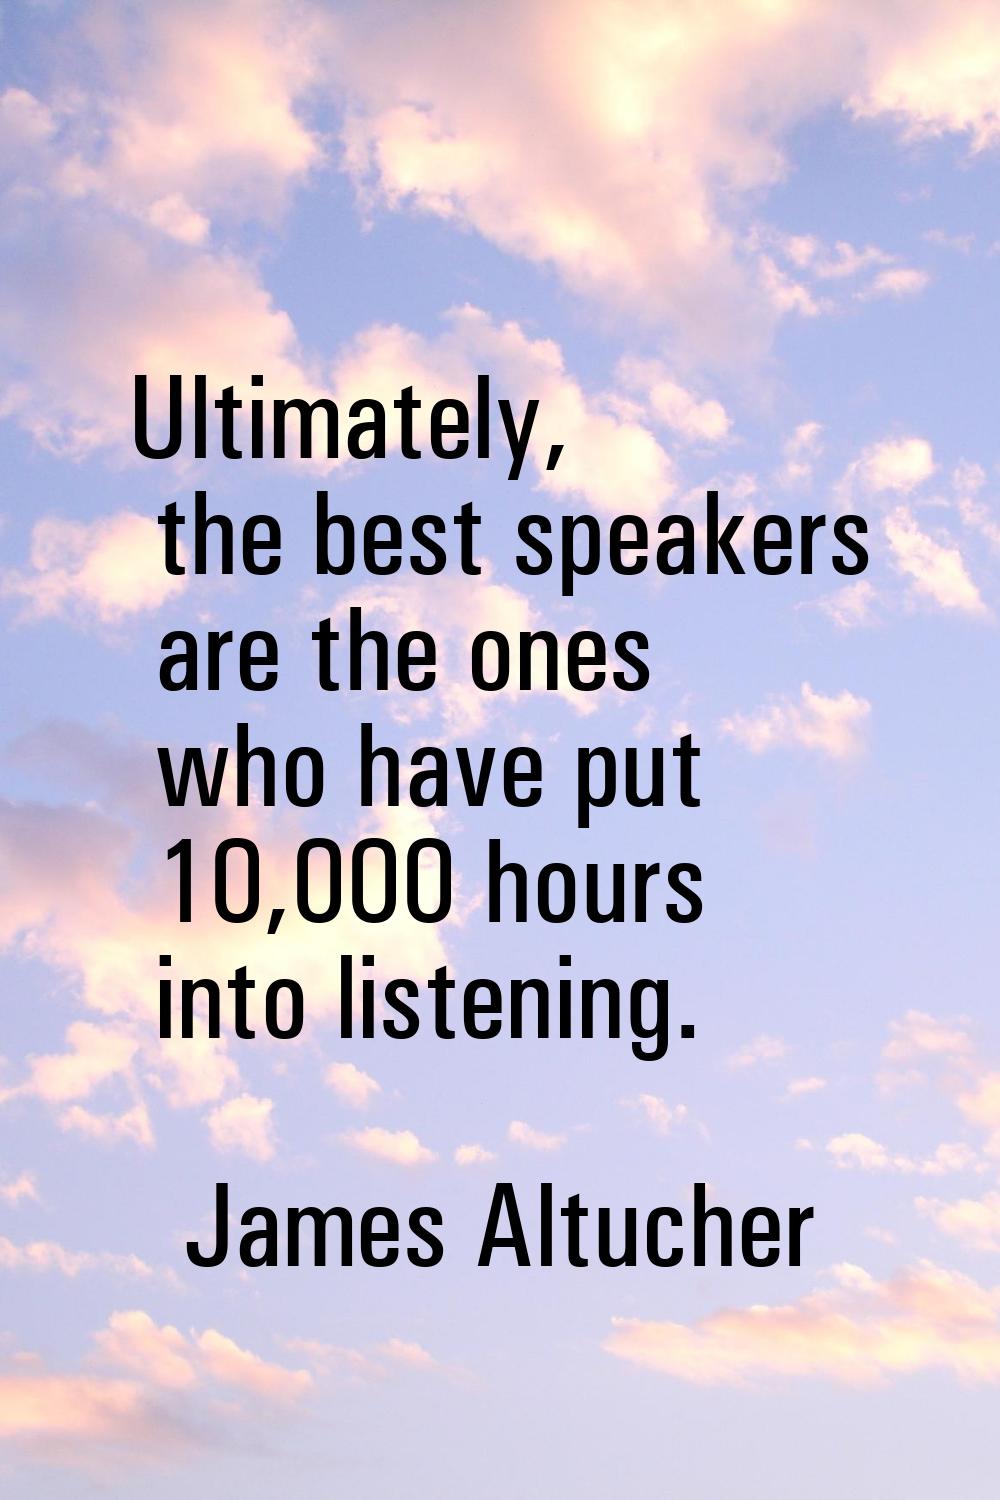 Ultimately, the best speakers are the ones who have put 10,000 hours into listening.